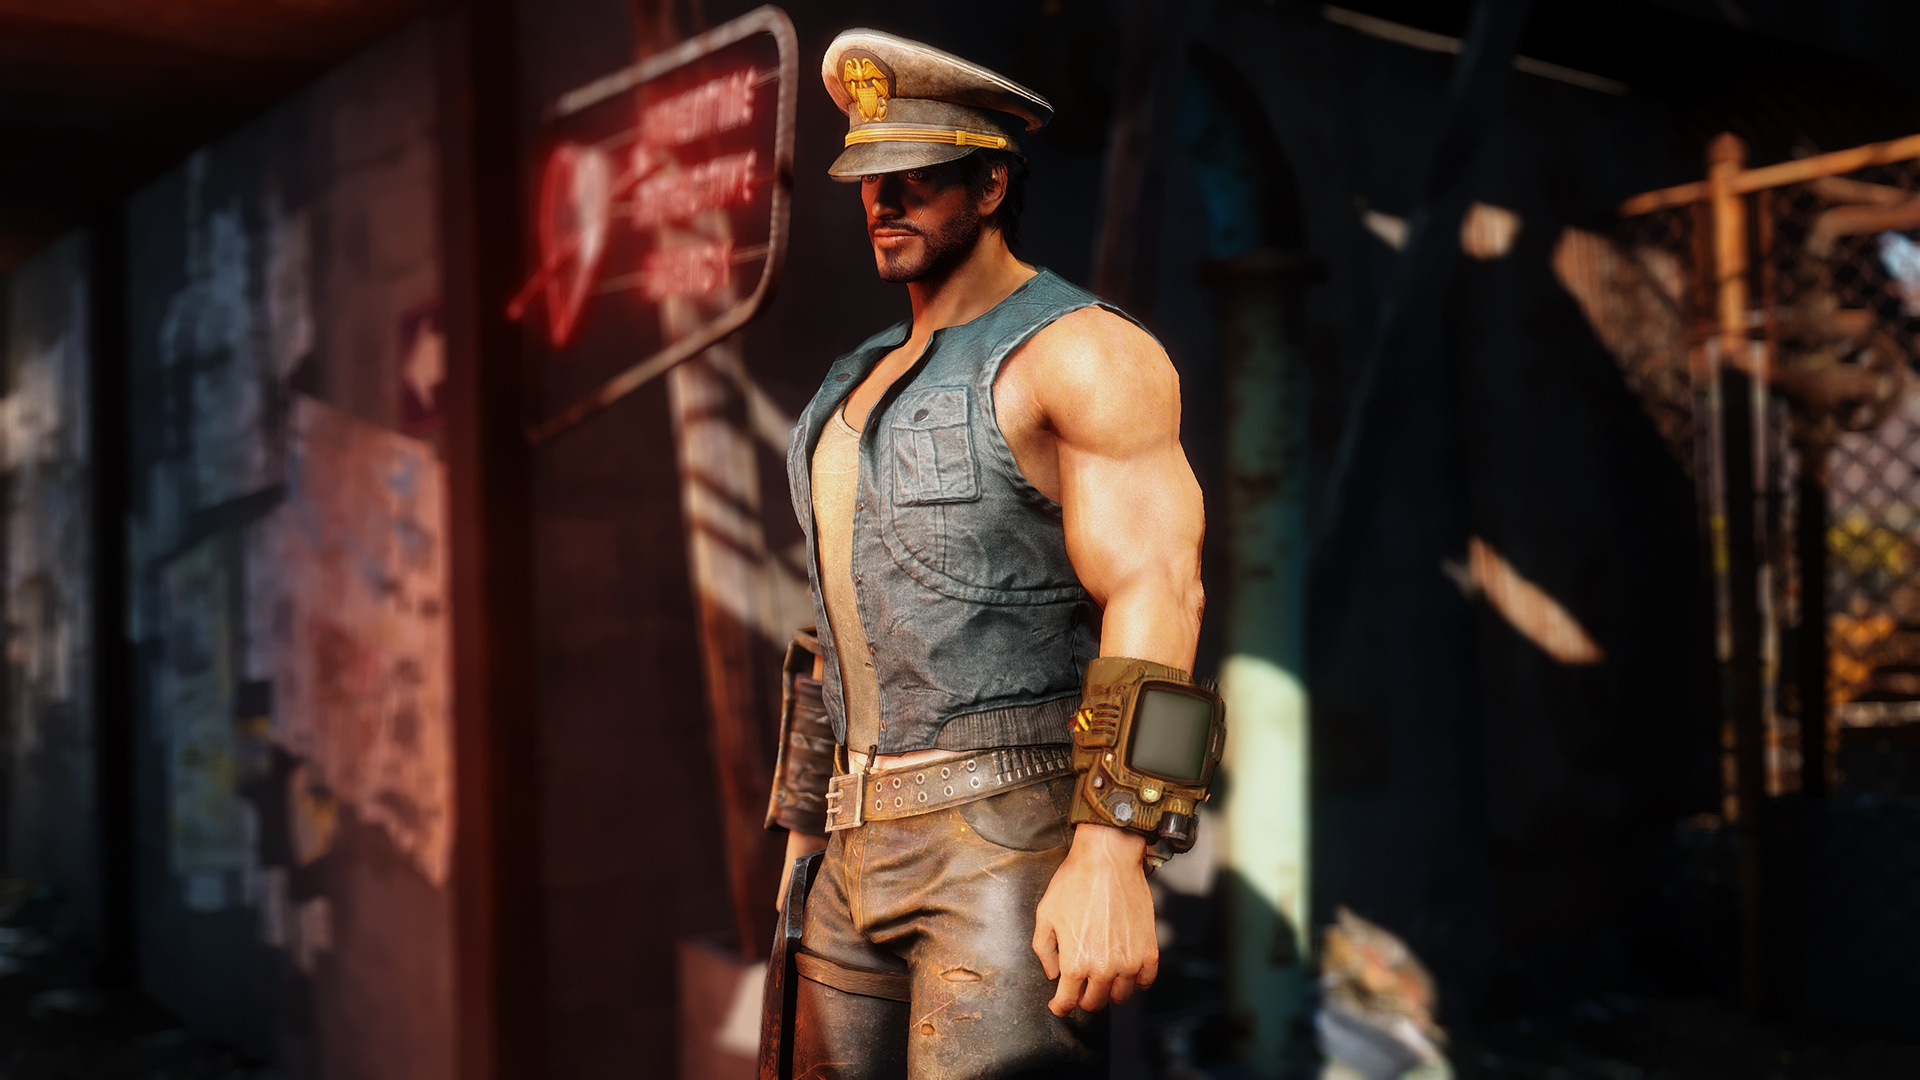 7 Best Fallout 4 Body Mods and Face Mods | HackerNoon